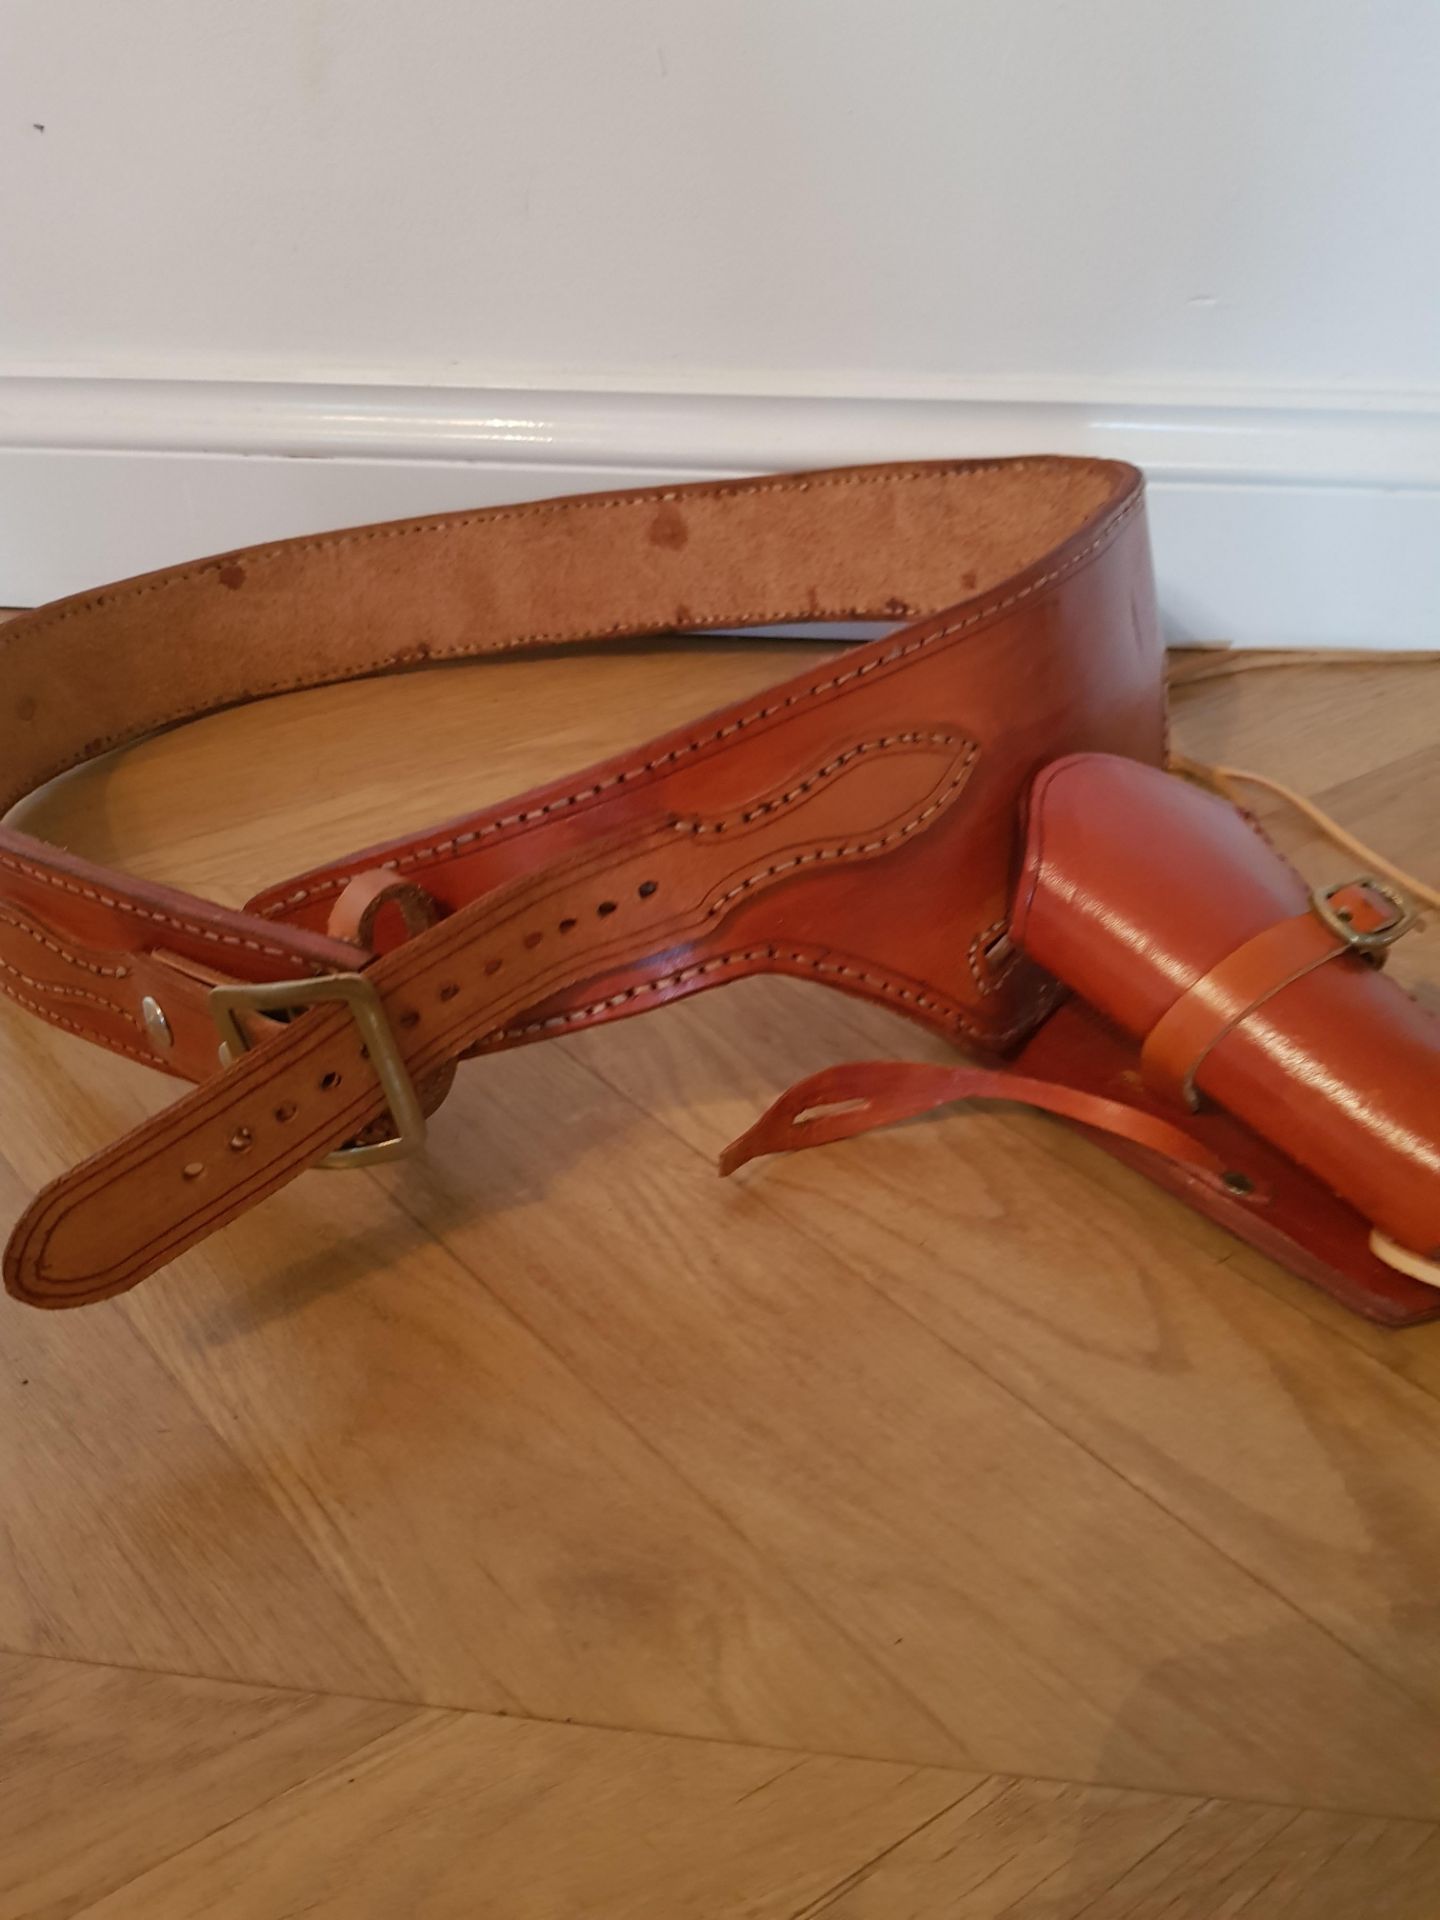 Tan Leather Western Gun Belt with Holster - Image 2 of 3